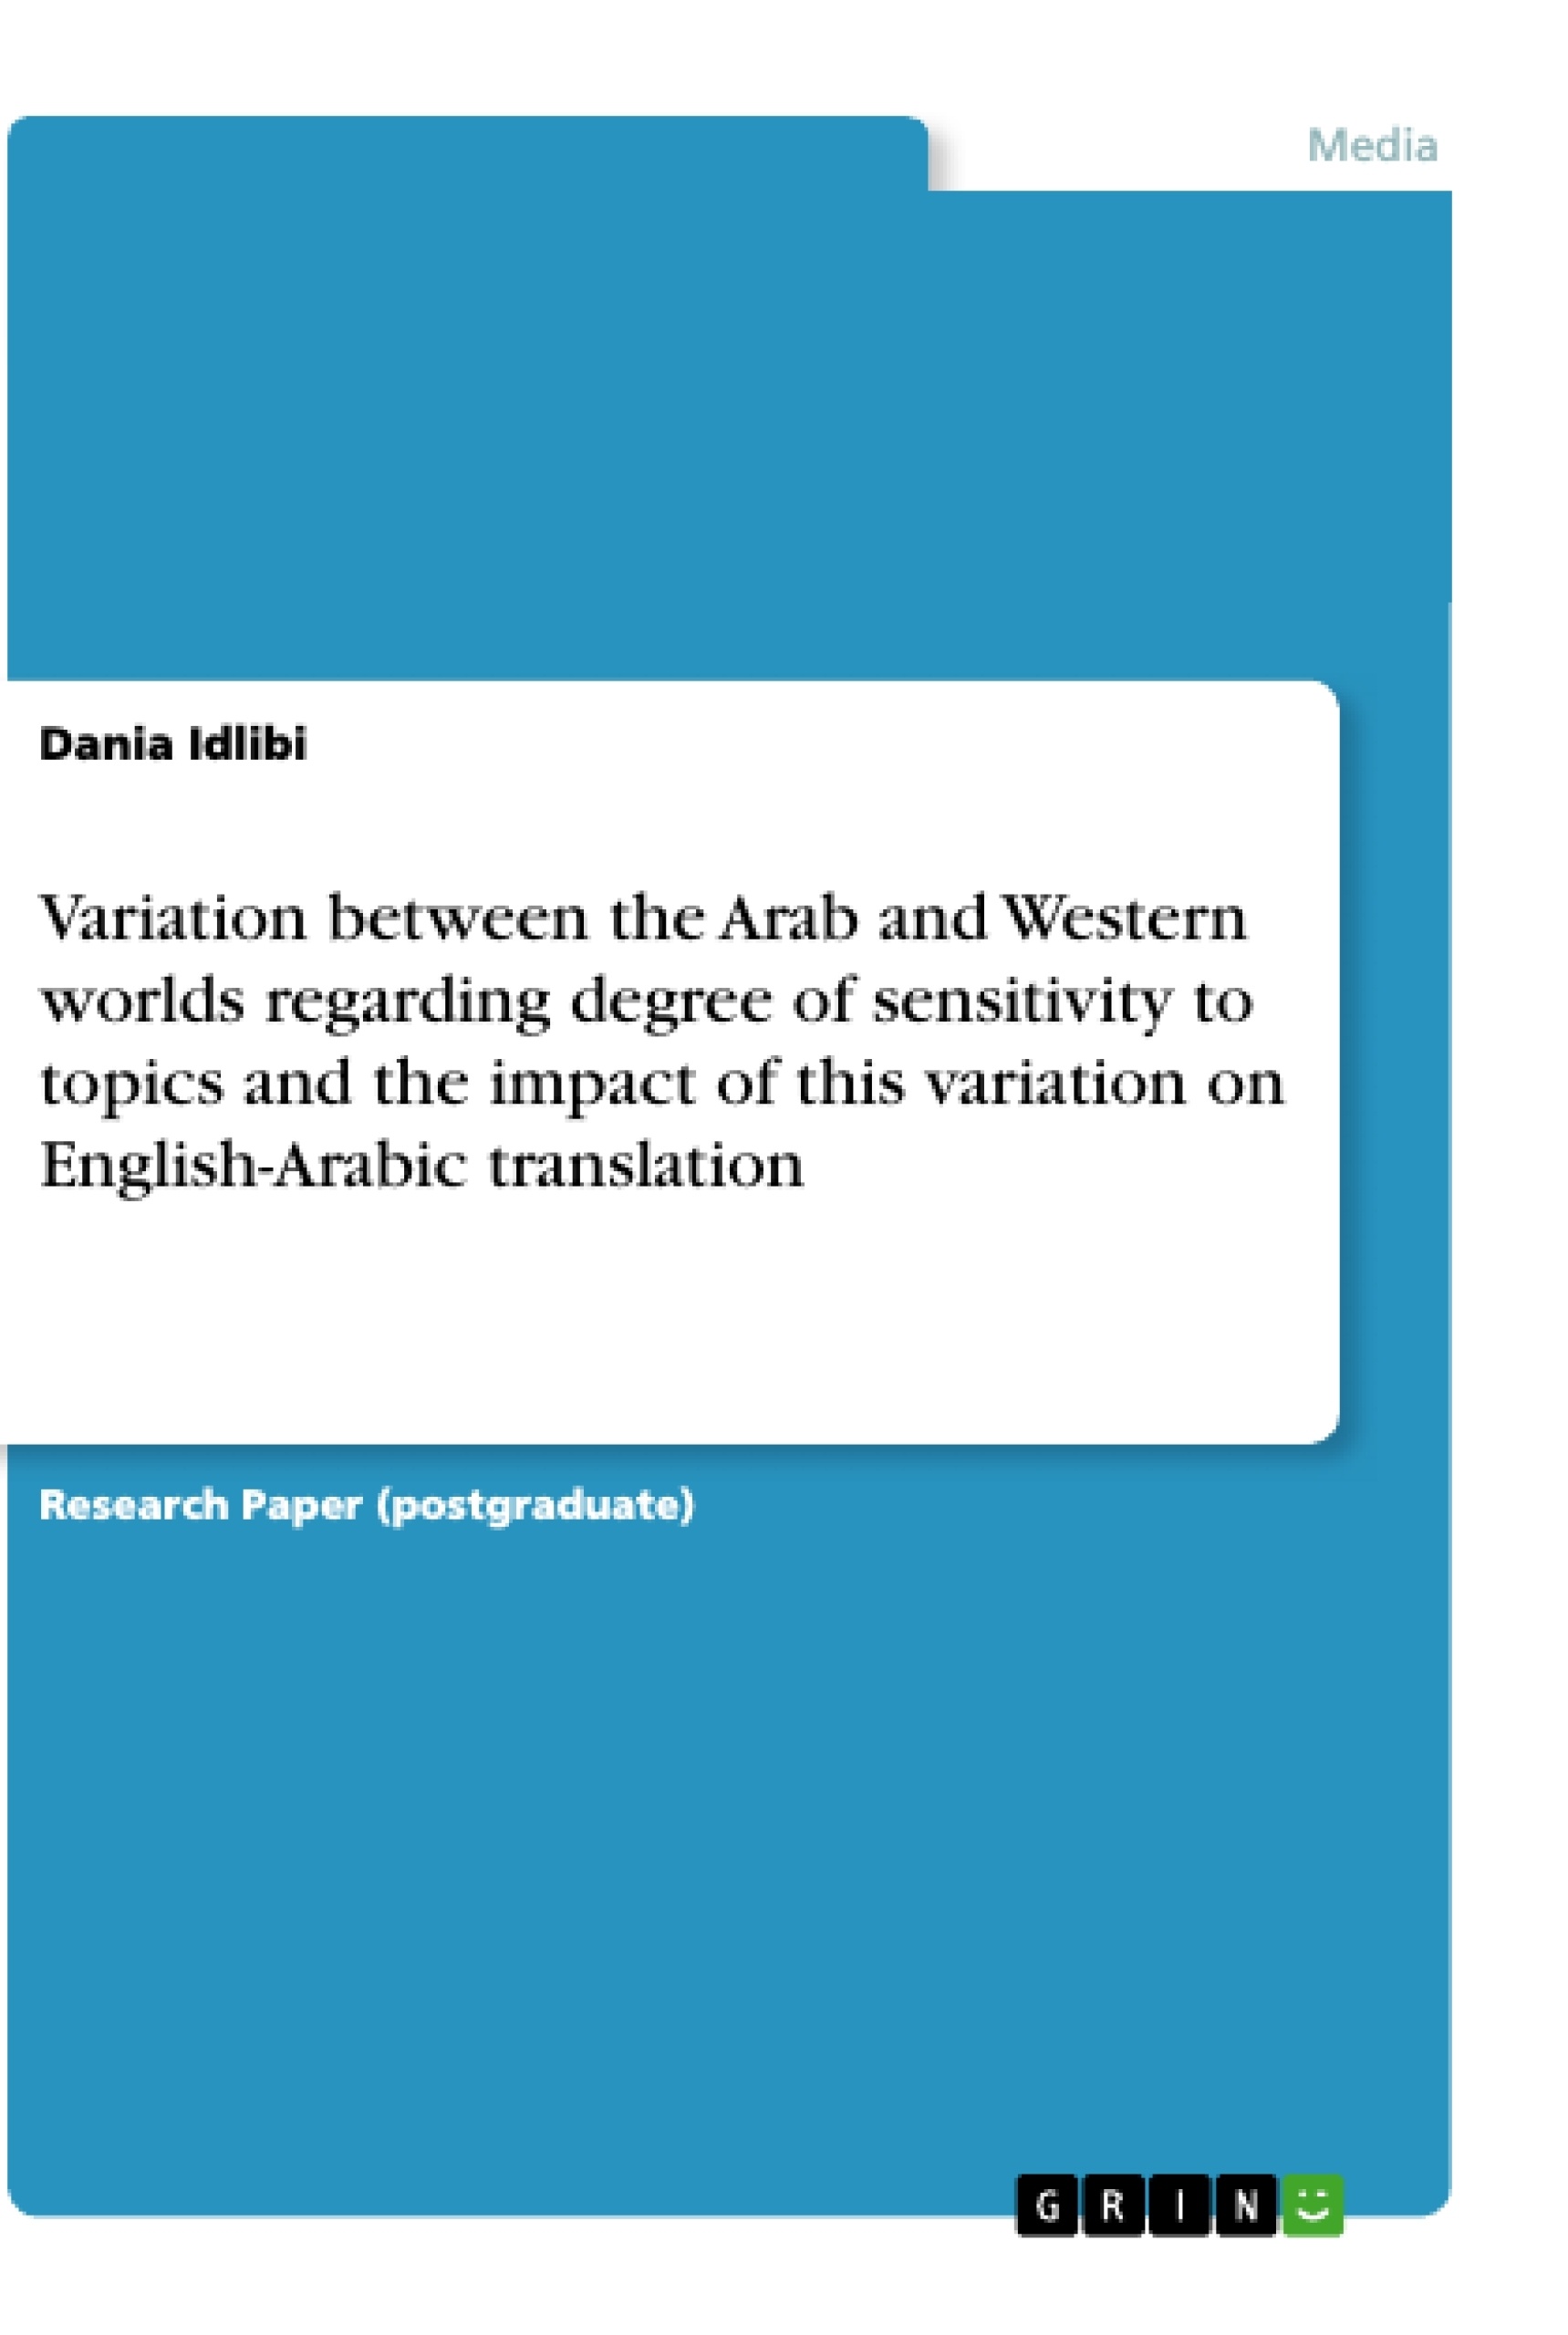 Title: Variation between the Arab and Western worlds regarding degree of sensitivity to topics and the impact of this variation on English-Arabic translation